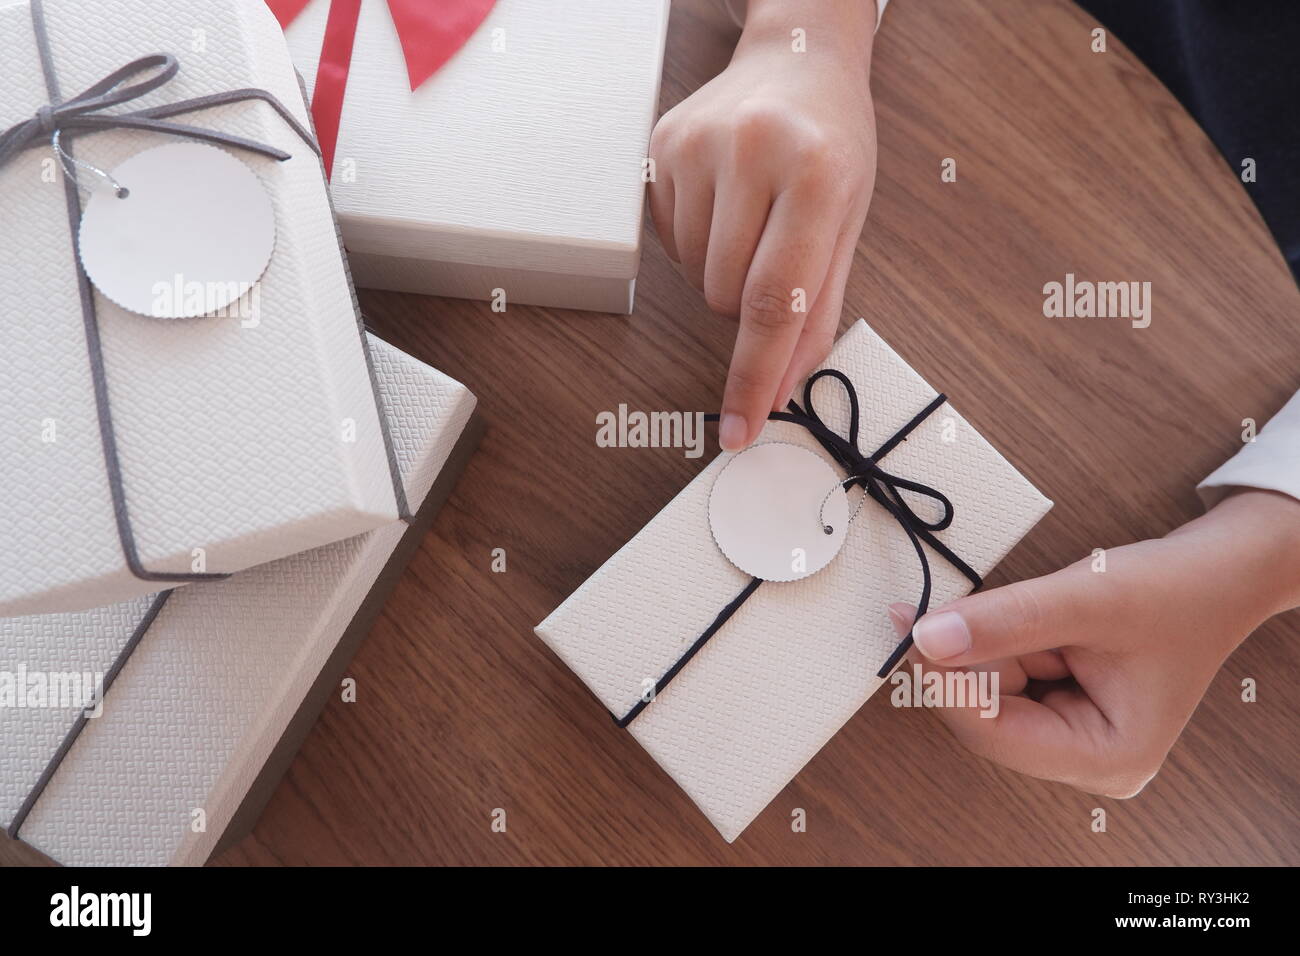 Woman hands wrapping gift box, unwrap or open present Stock Photo